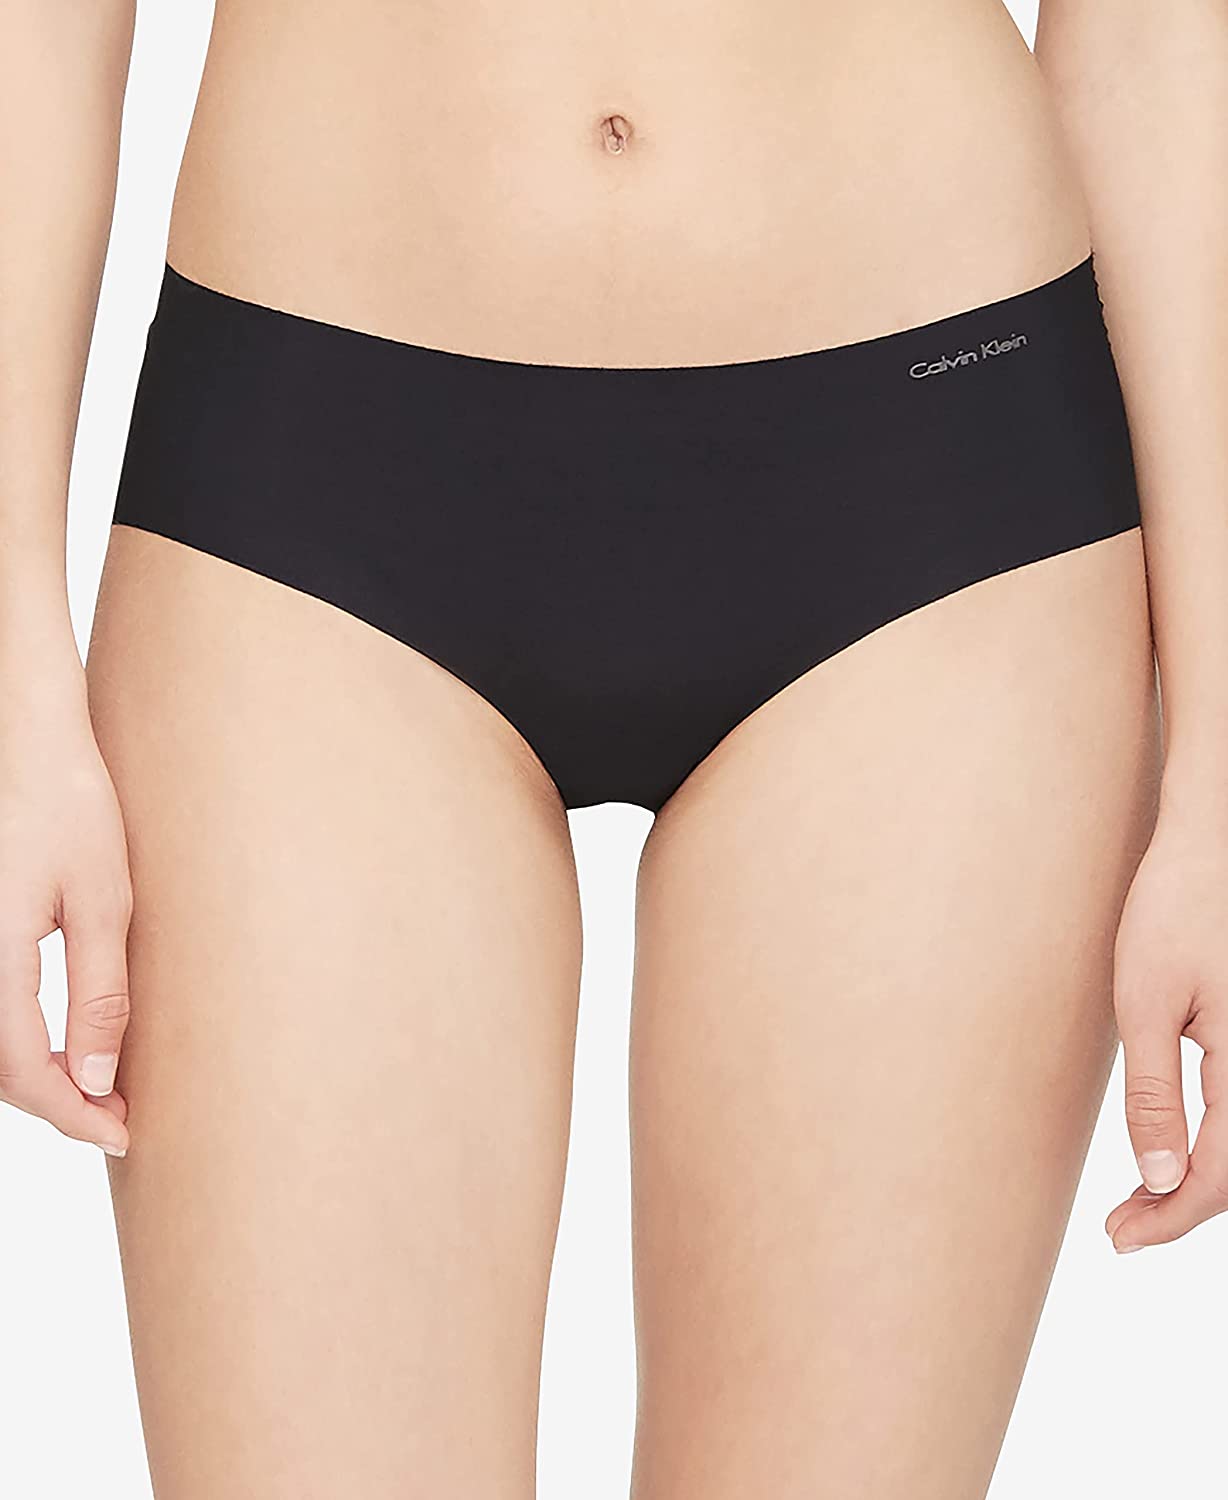 Women's Invisibles Seamless Hipster Panties, Multipack